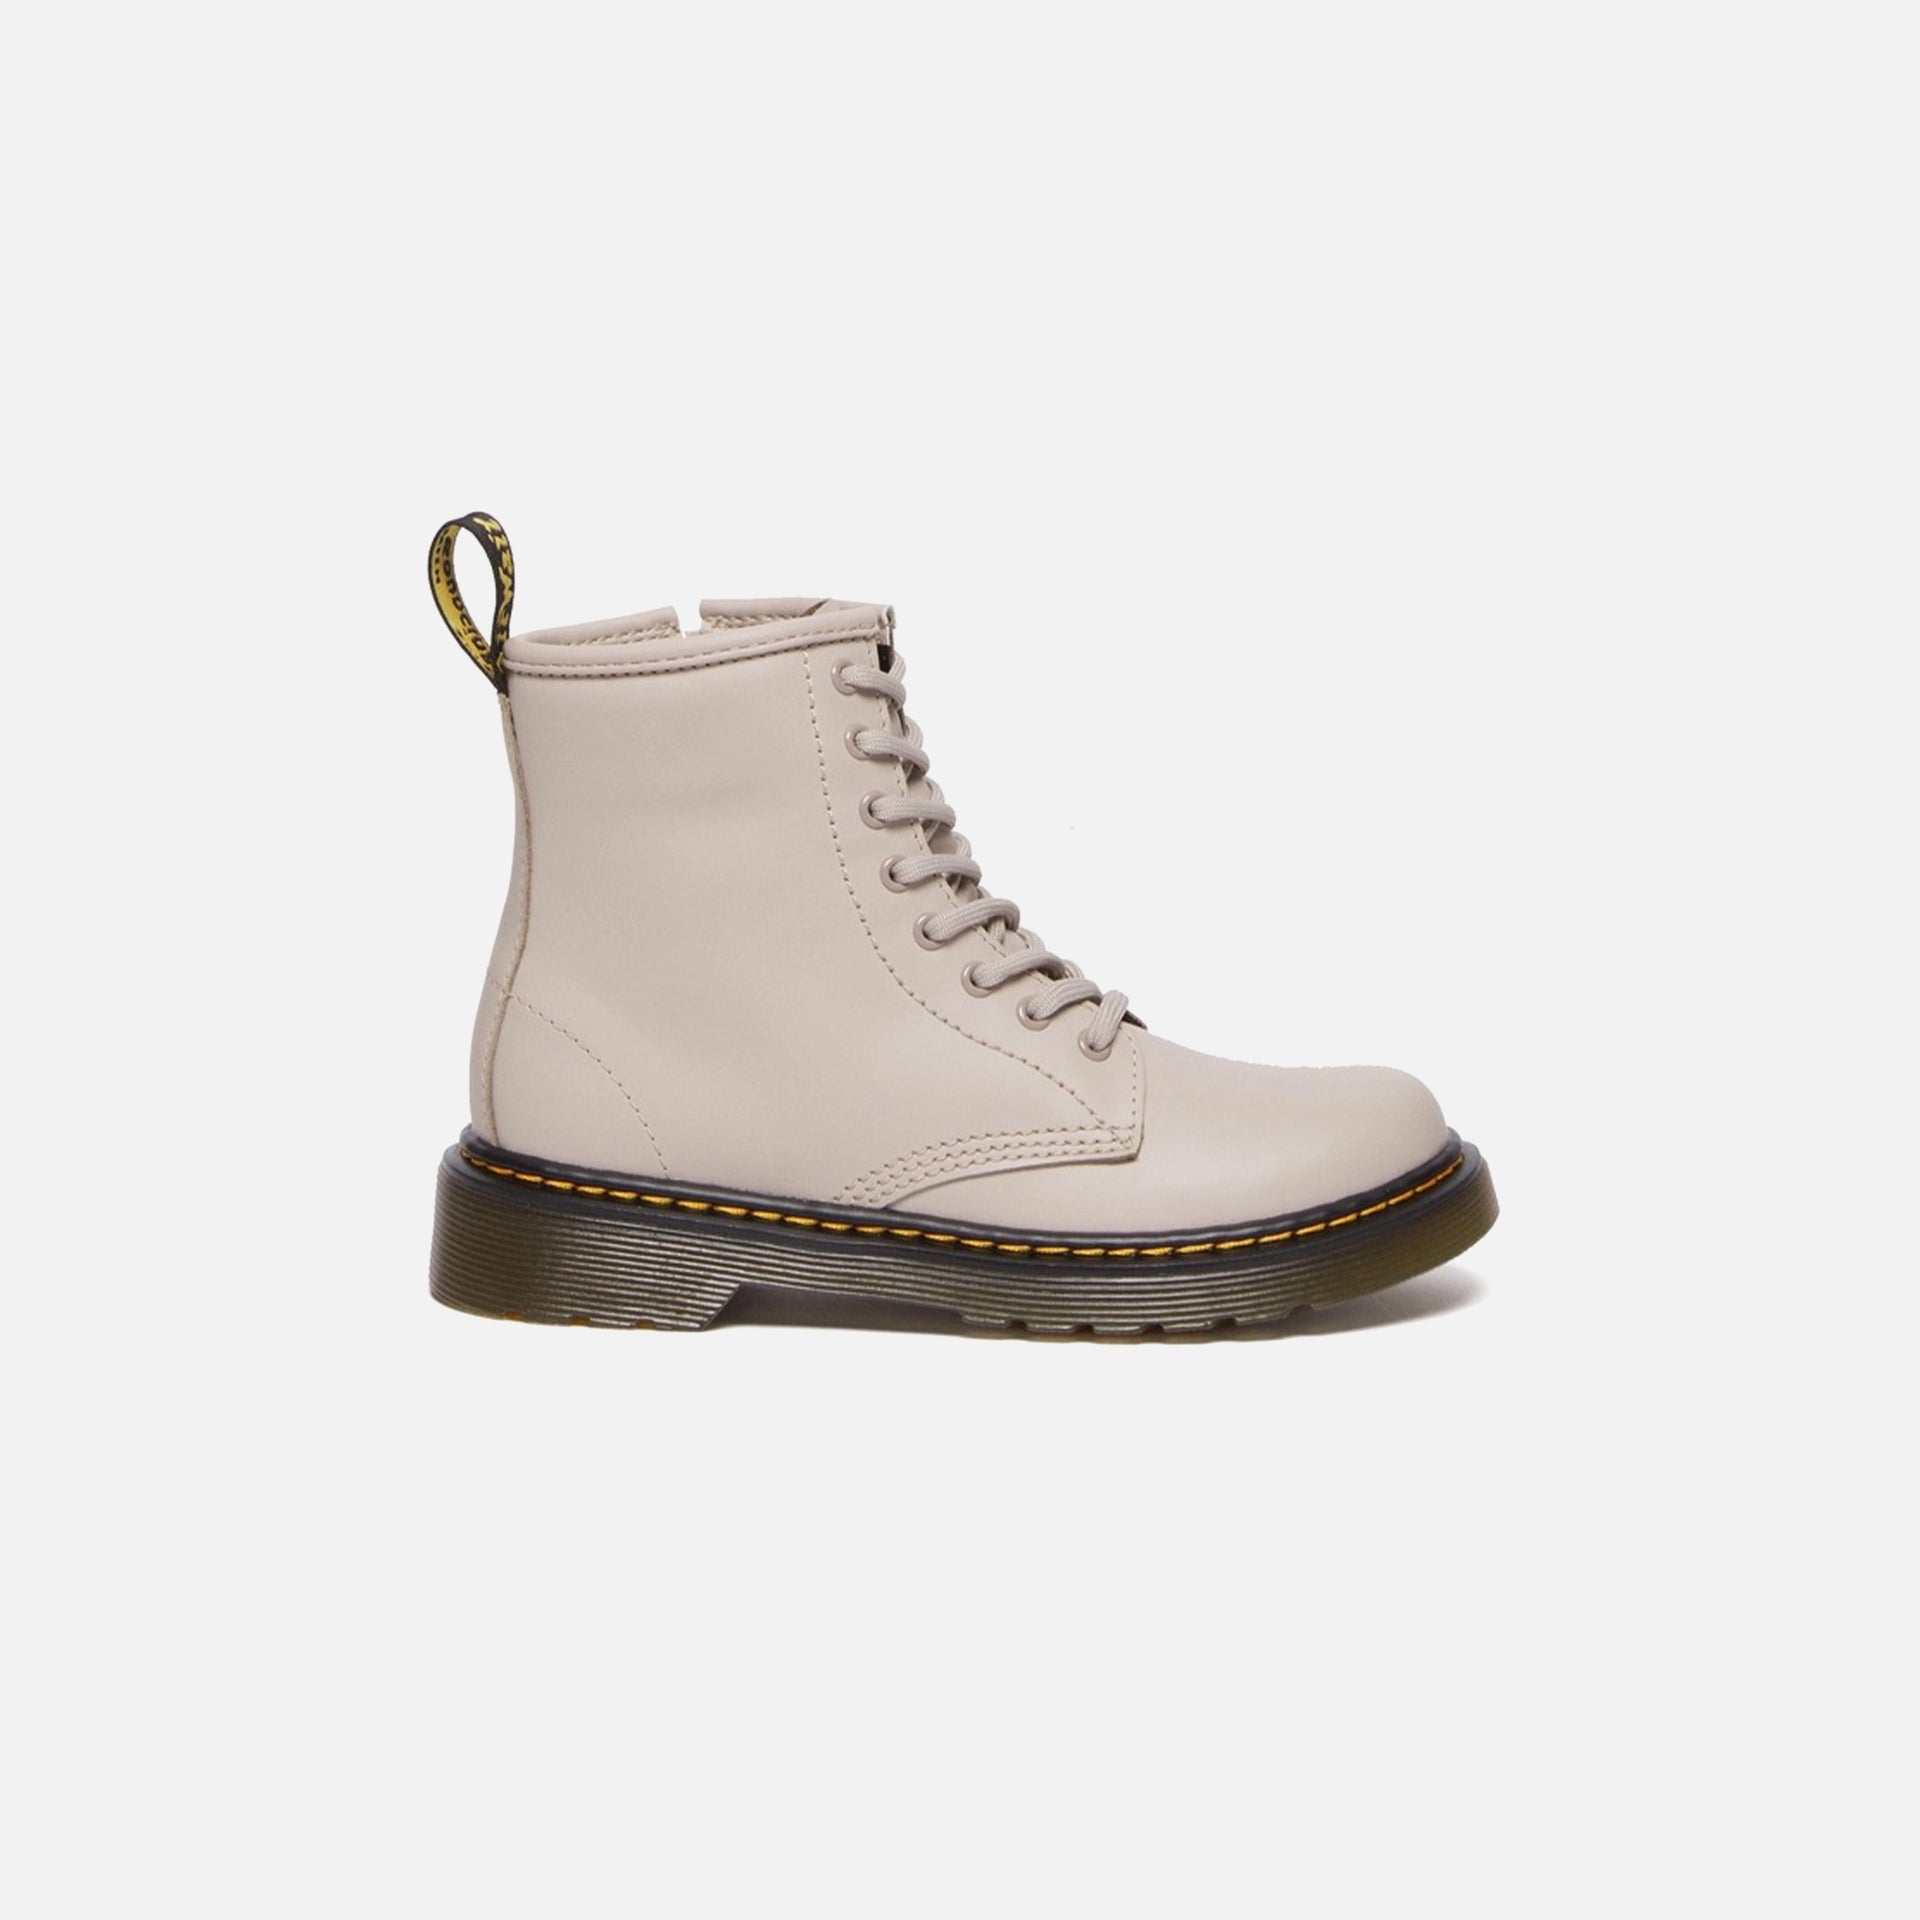 Dr. Sinclair Martens Youth 1460 Romario - Vintage Taupe